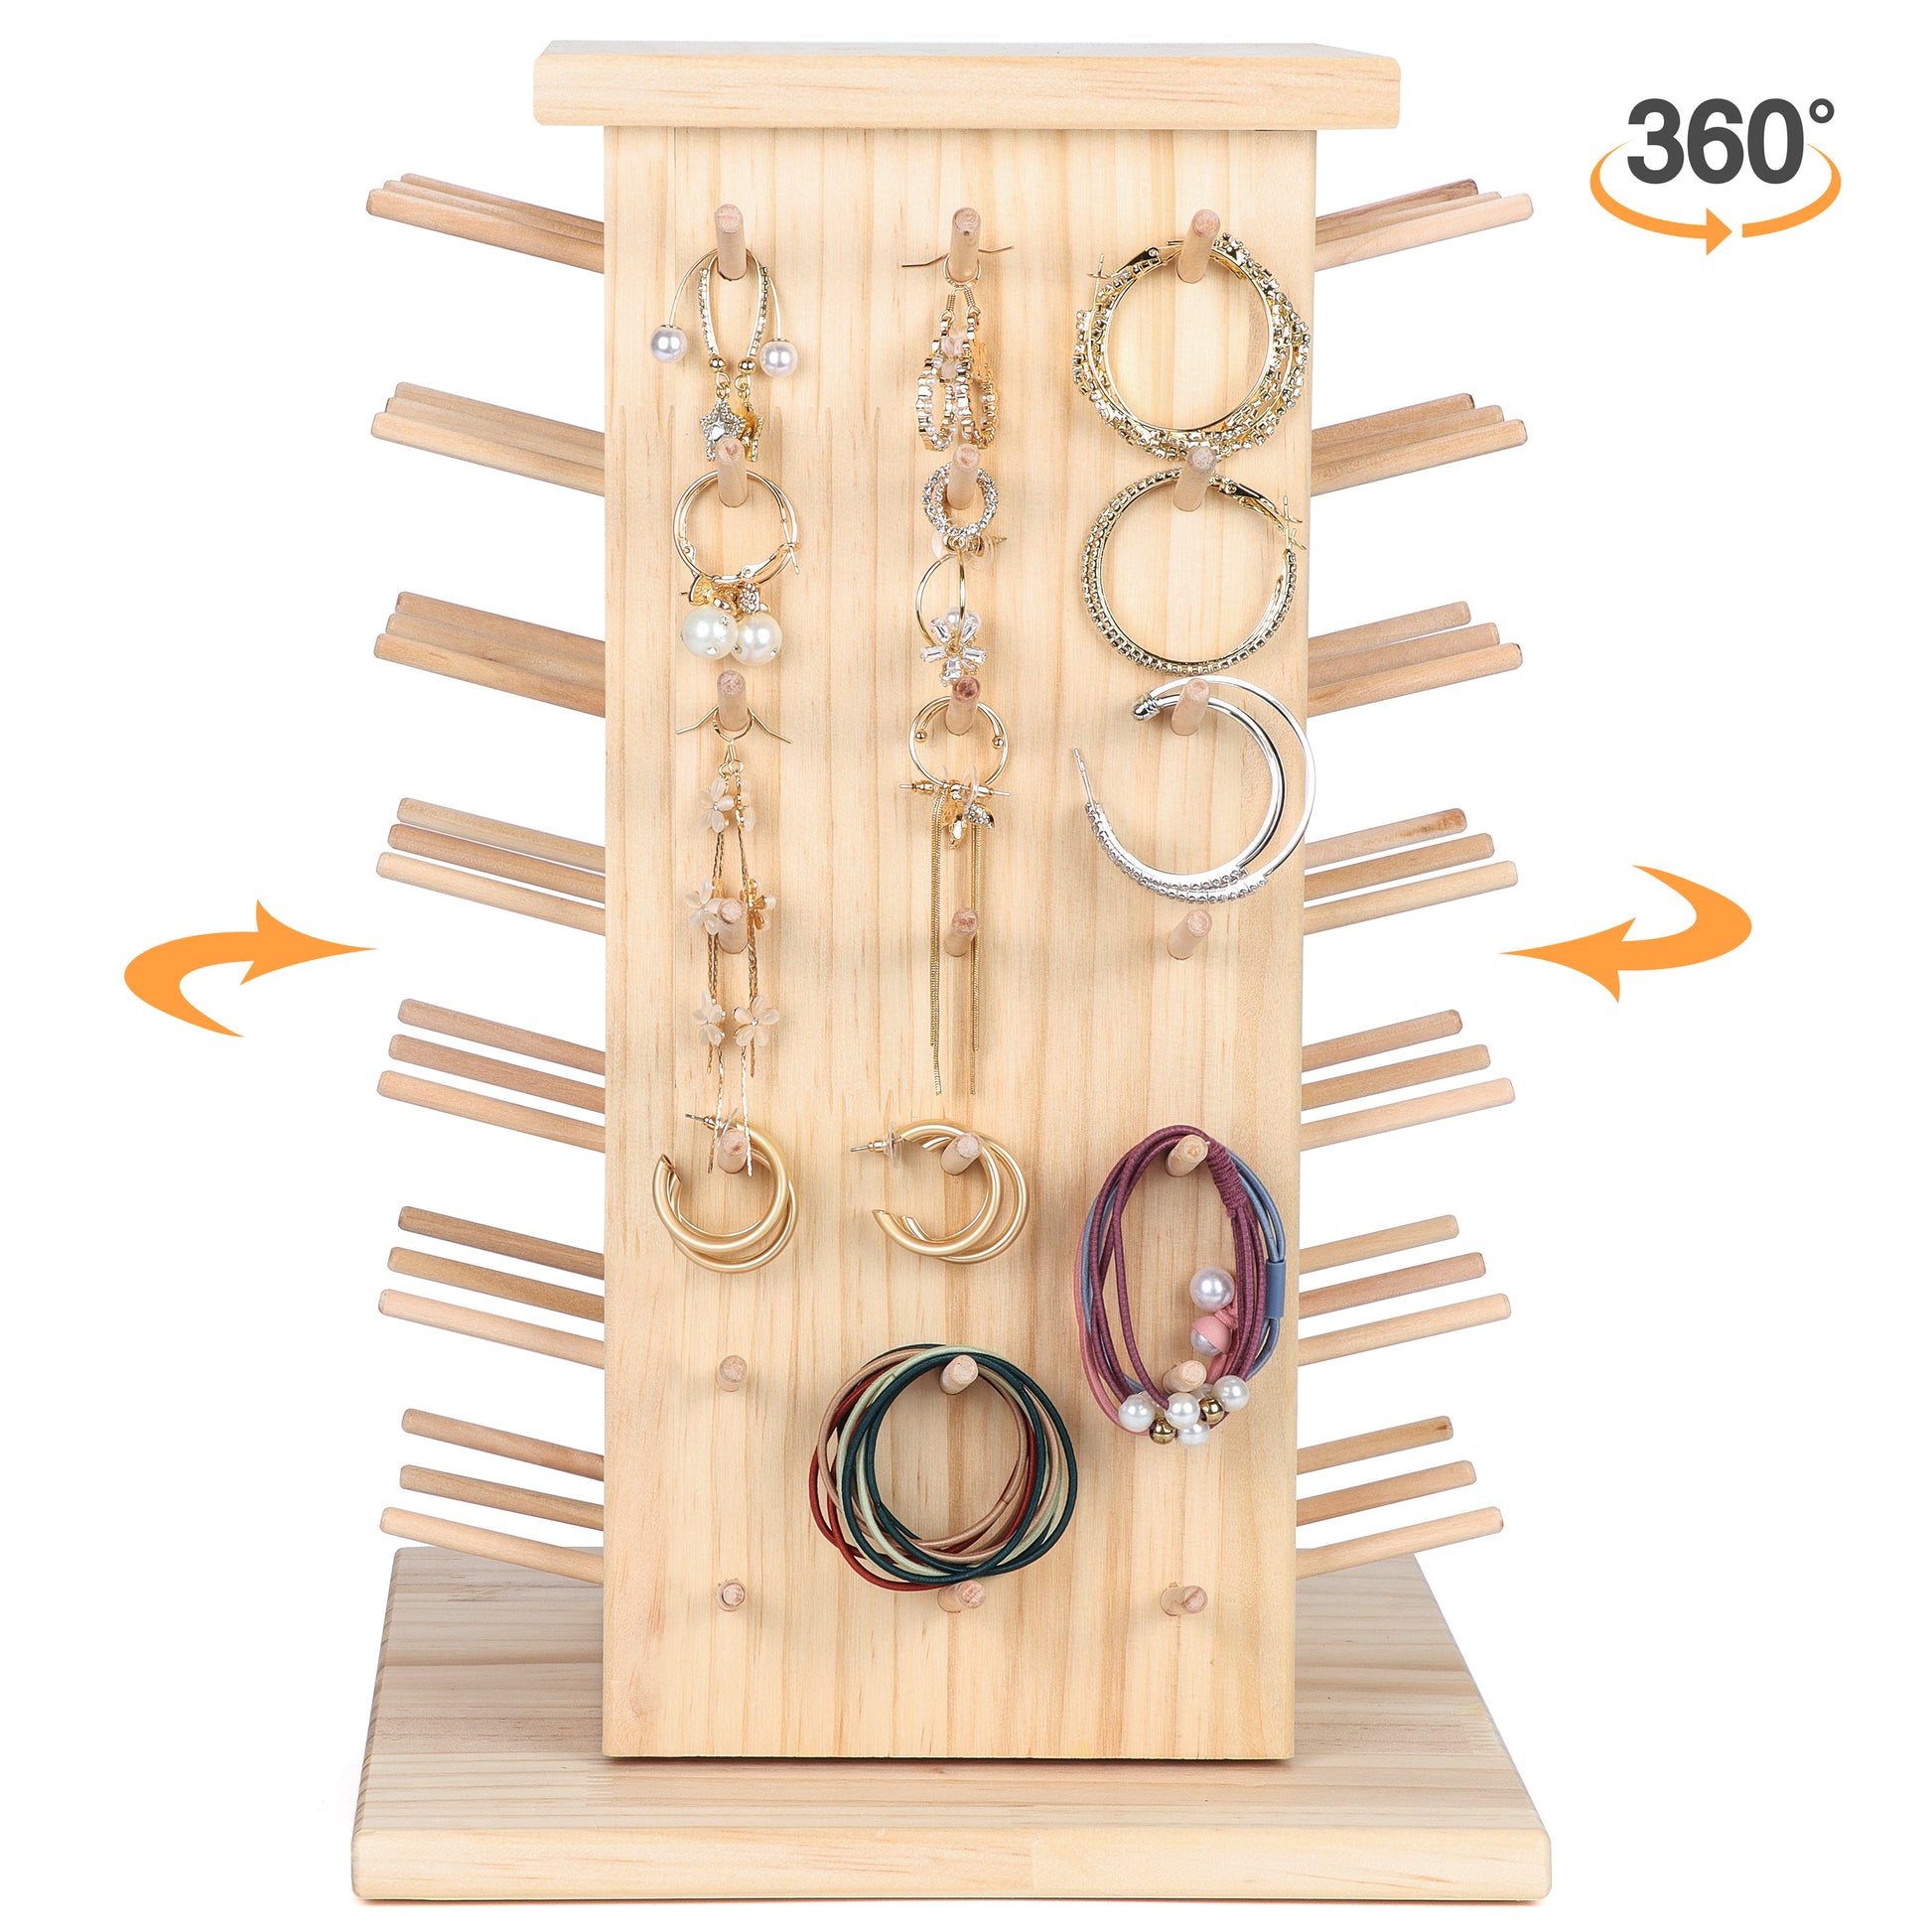 New brothread 60 Spools + 12 Spools Wooden Thread Rack/Thread Holder Organizer with Hanging Hooks for Embroidery Quilting and Sewing Threads - Mother